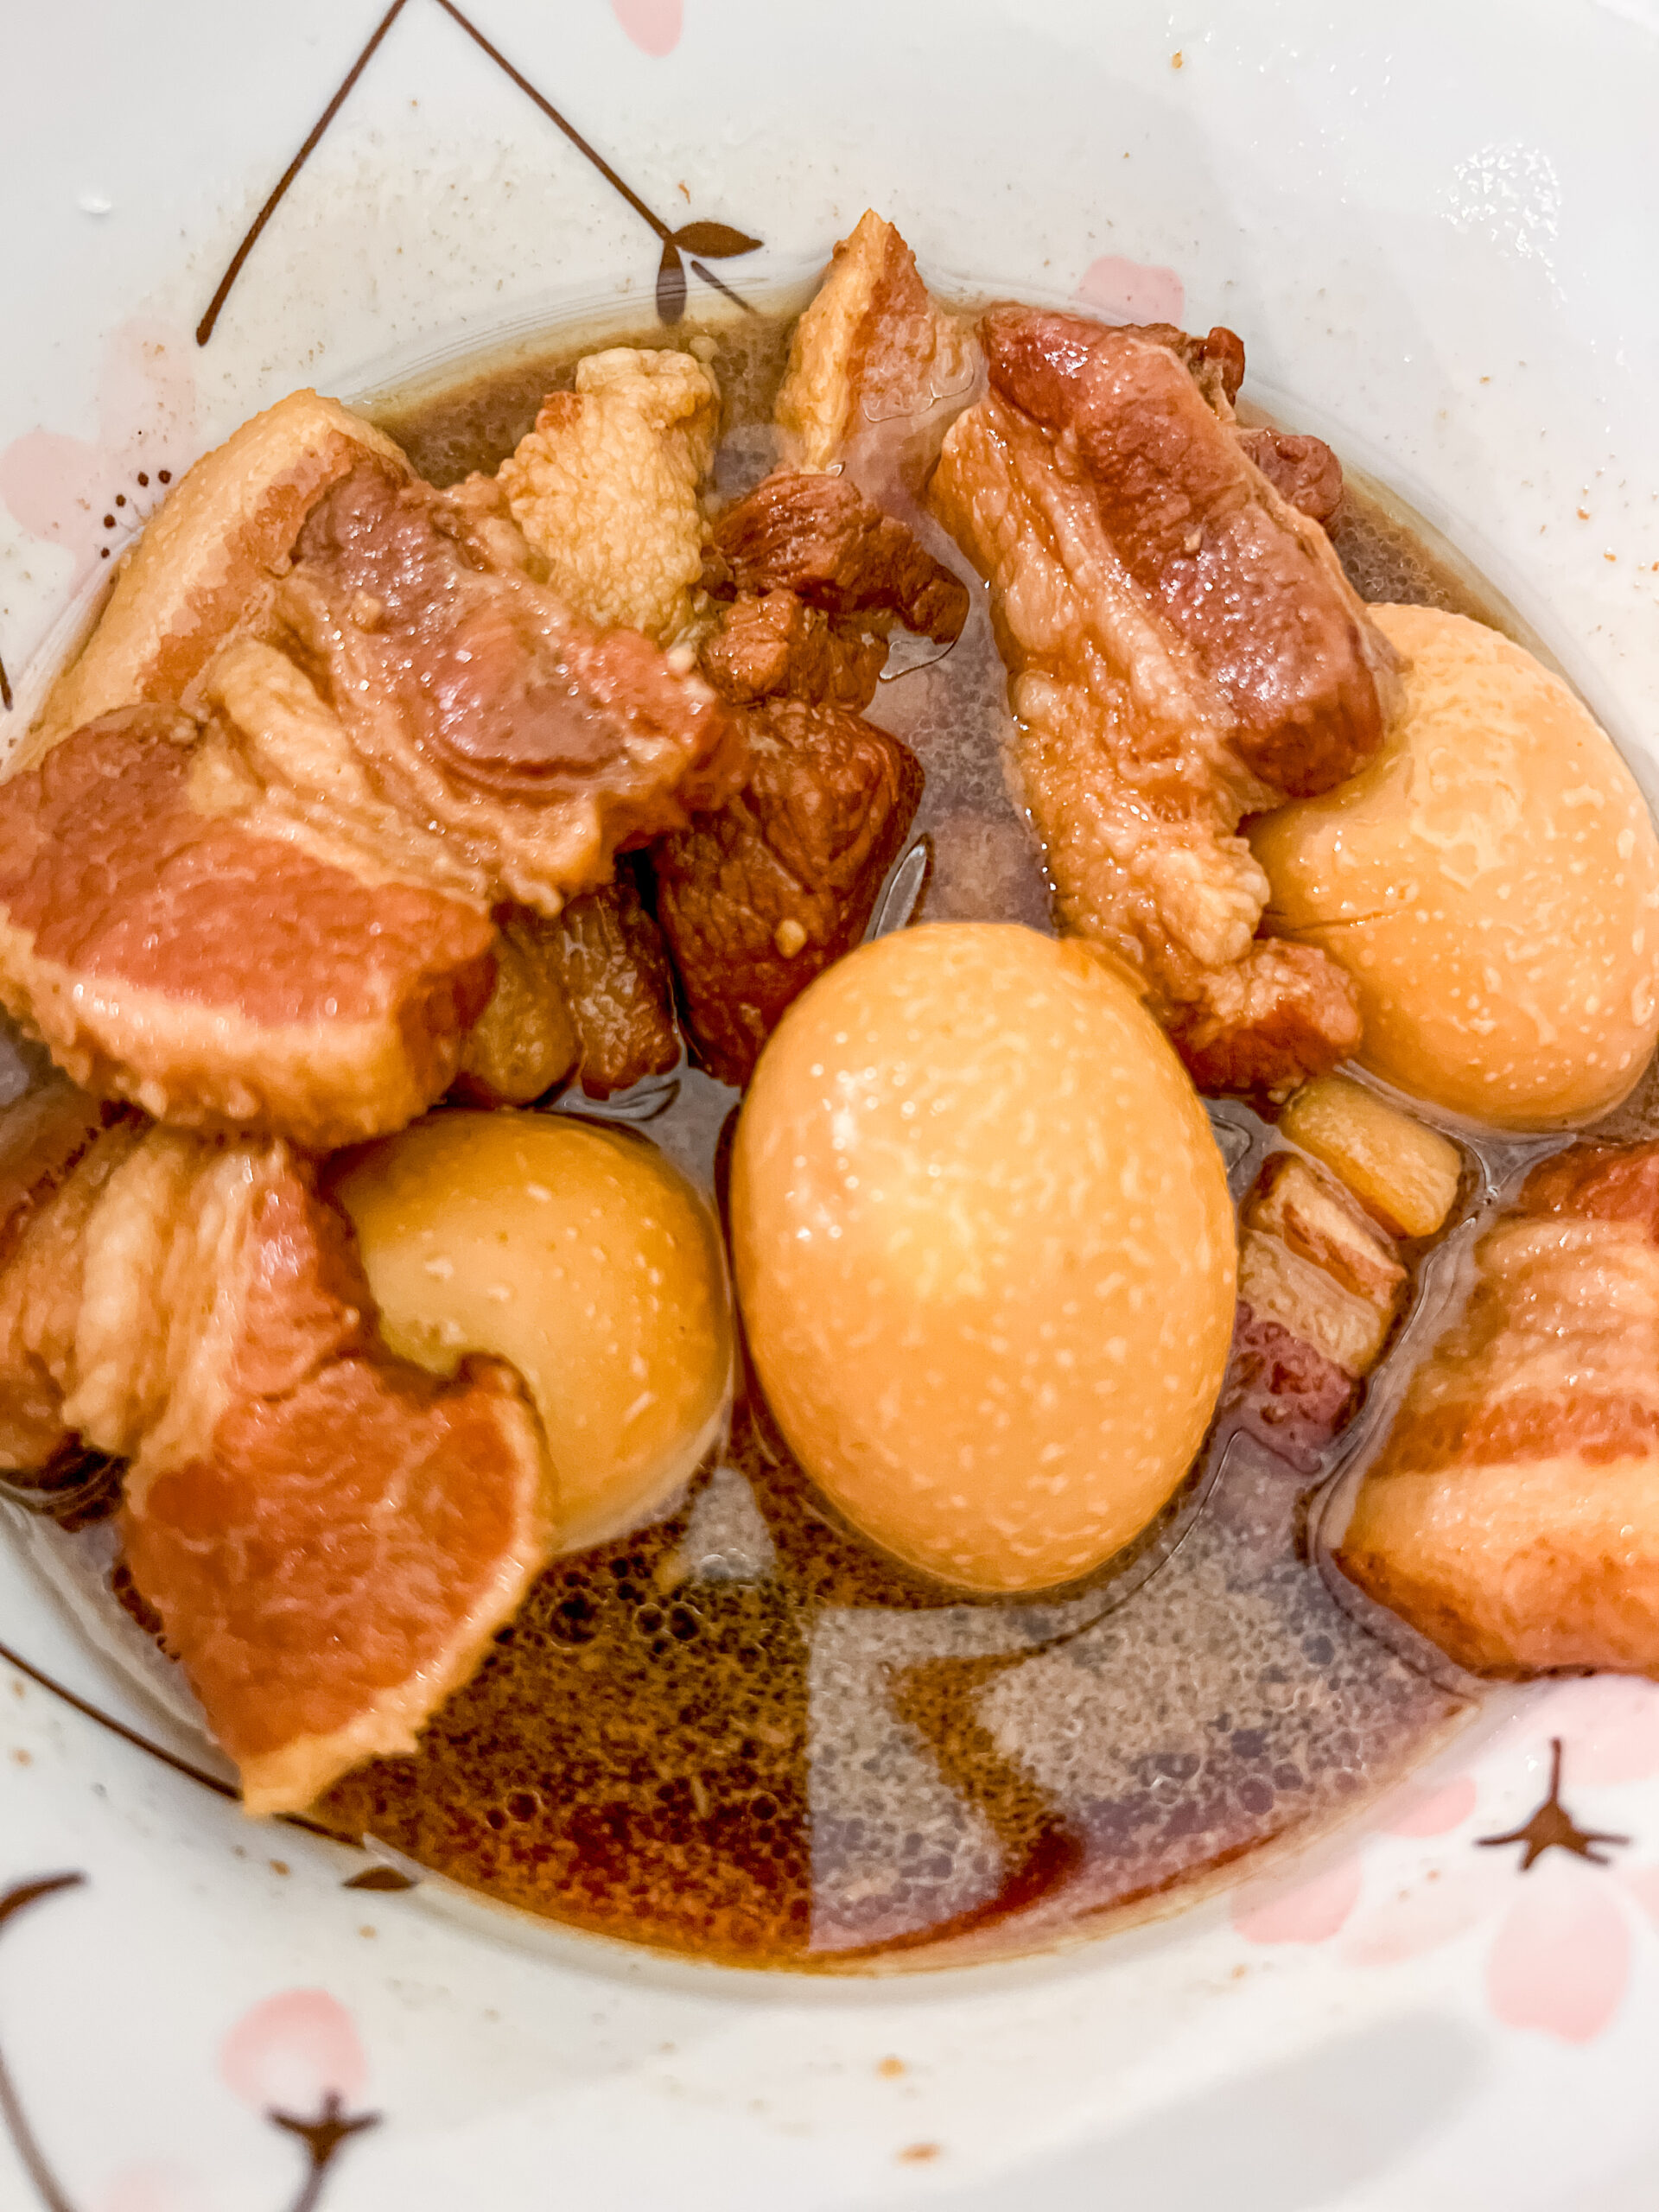 How to Make Authentic Vietnamese Braised Pork Belly and Eggs (Thit Kho)